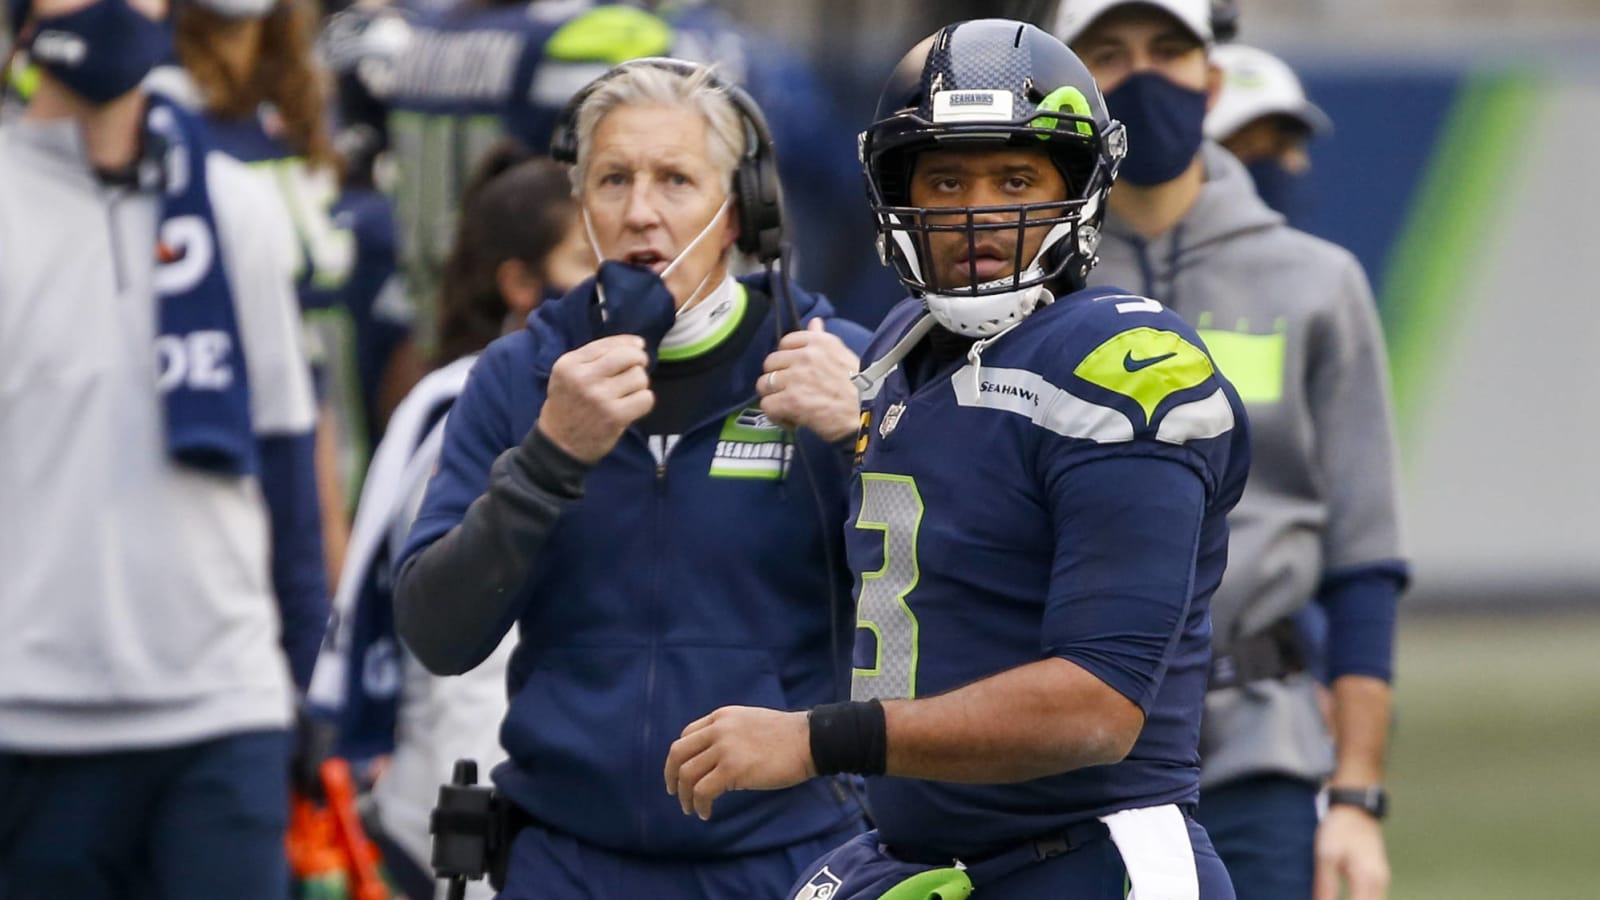 Seahawks' Wilson has 'gotten closer' with Carroll after drama